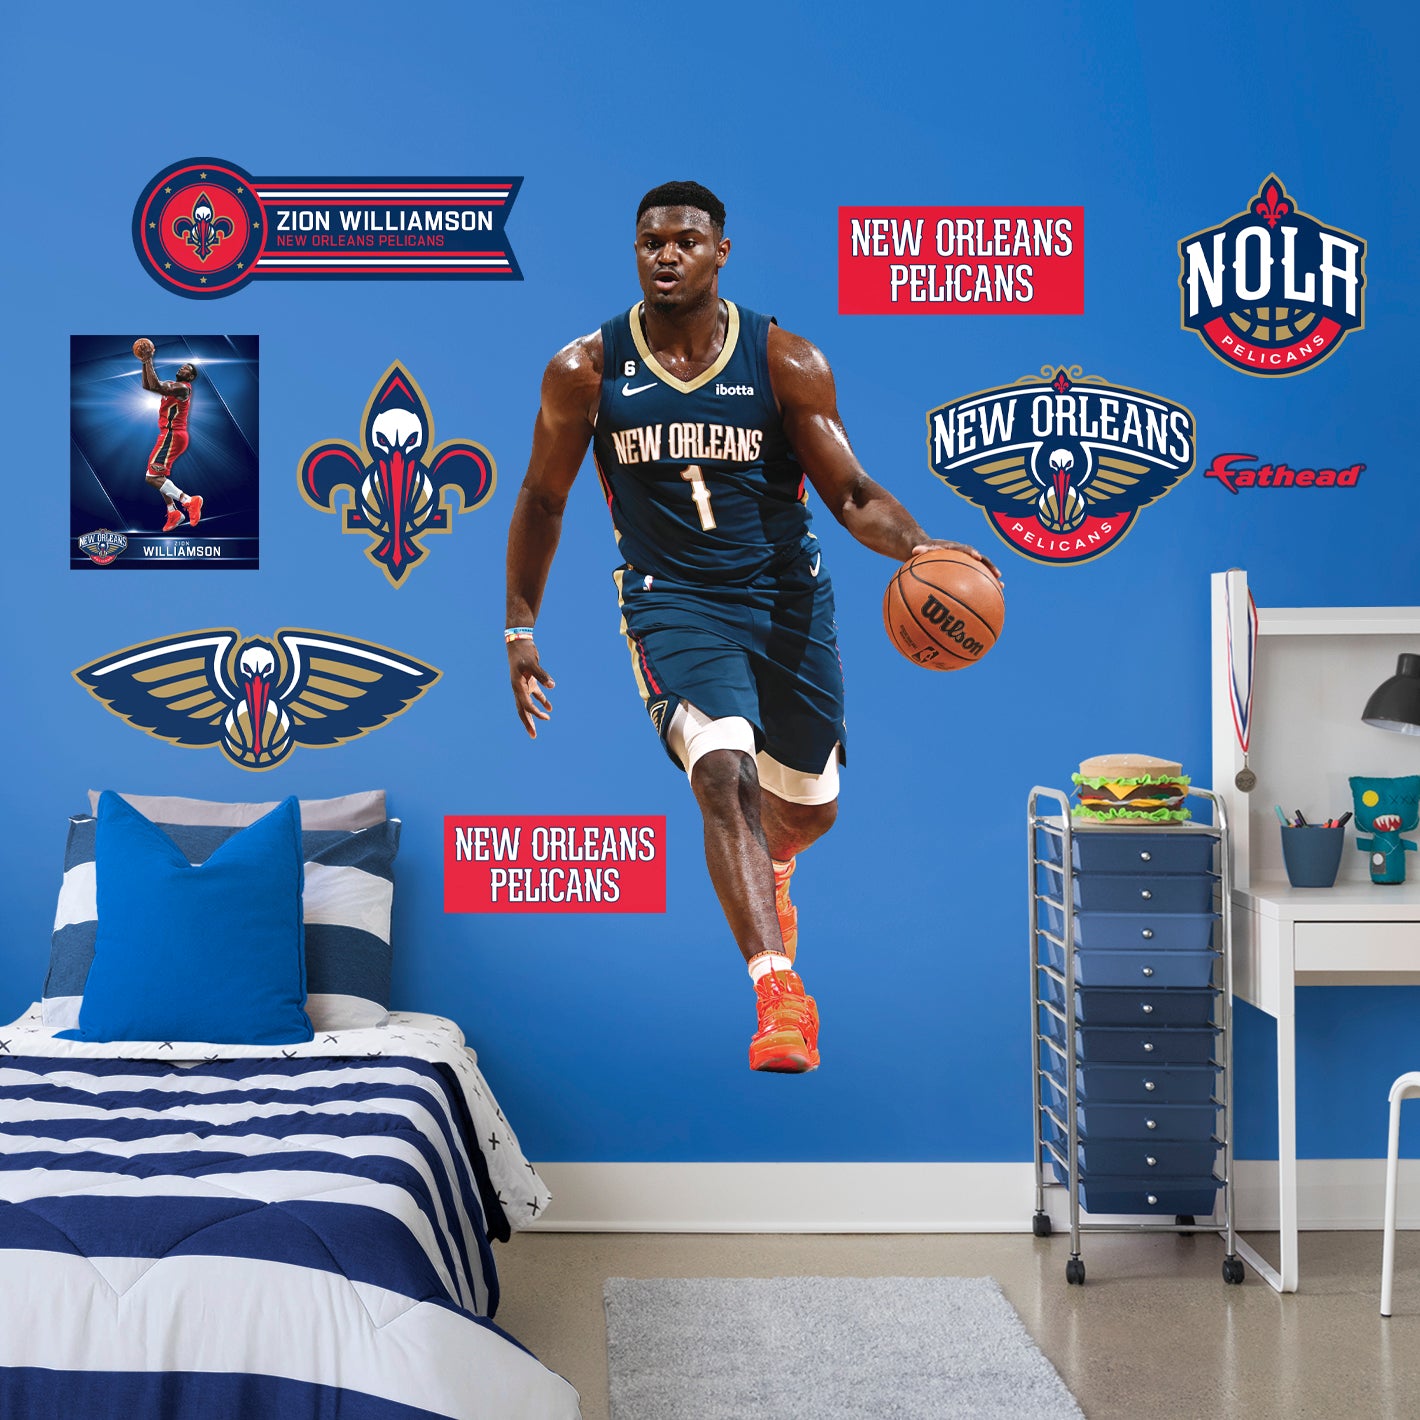 New Orleans Pelicans Wallpaper Hd Background Download Desktop New Orleans  Pelicans  照片图像